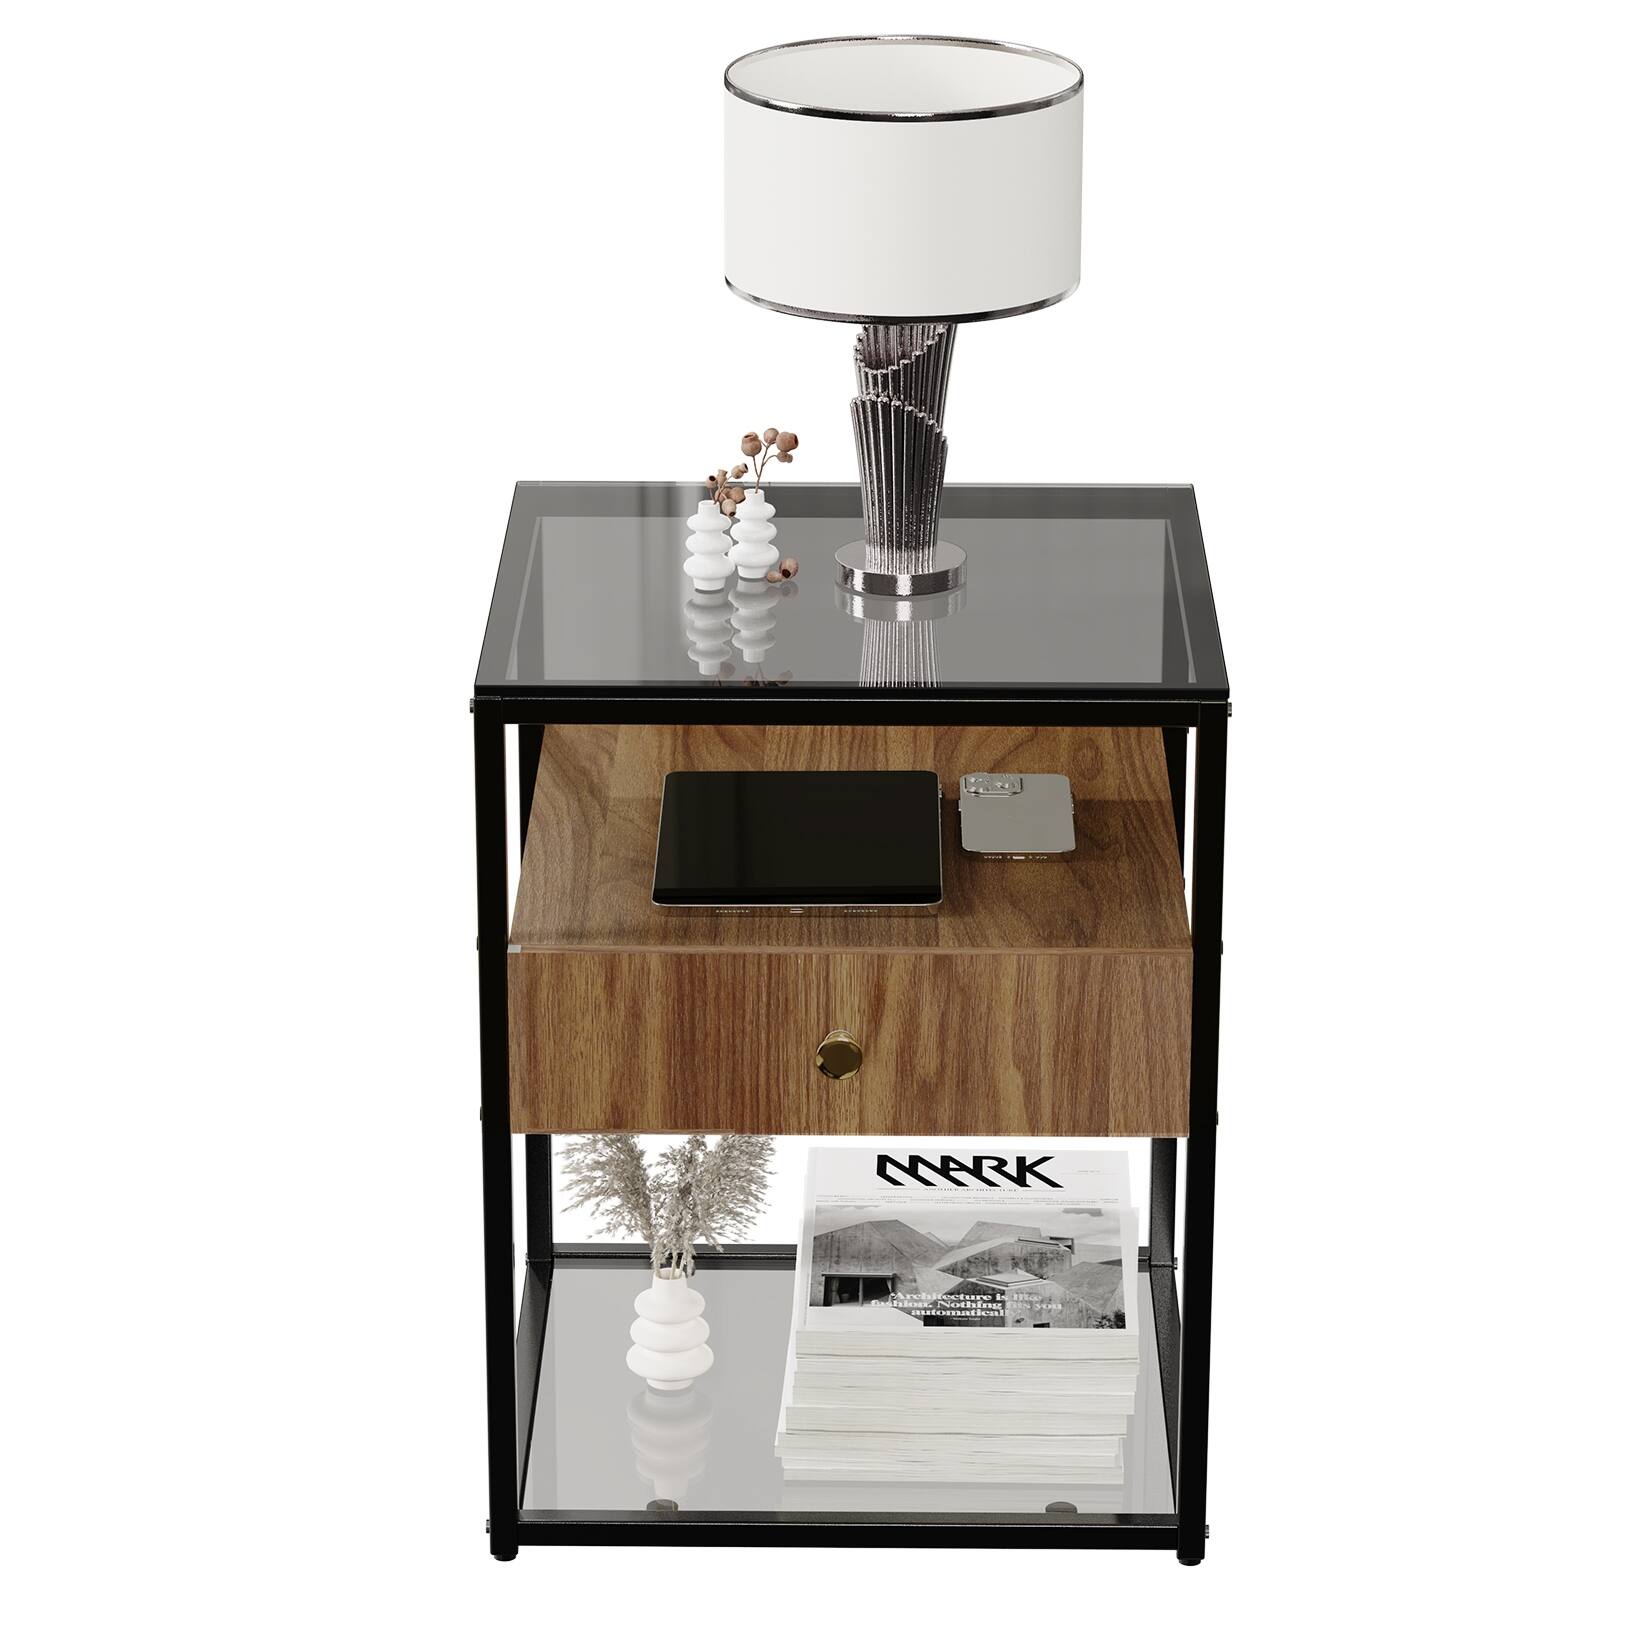 Modern Single-Drawer Glass End Table Bedside Nightstand Storage Table - 17" W x 17" L x 21.3" H